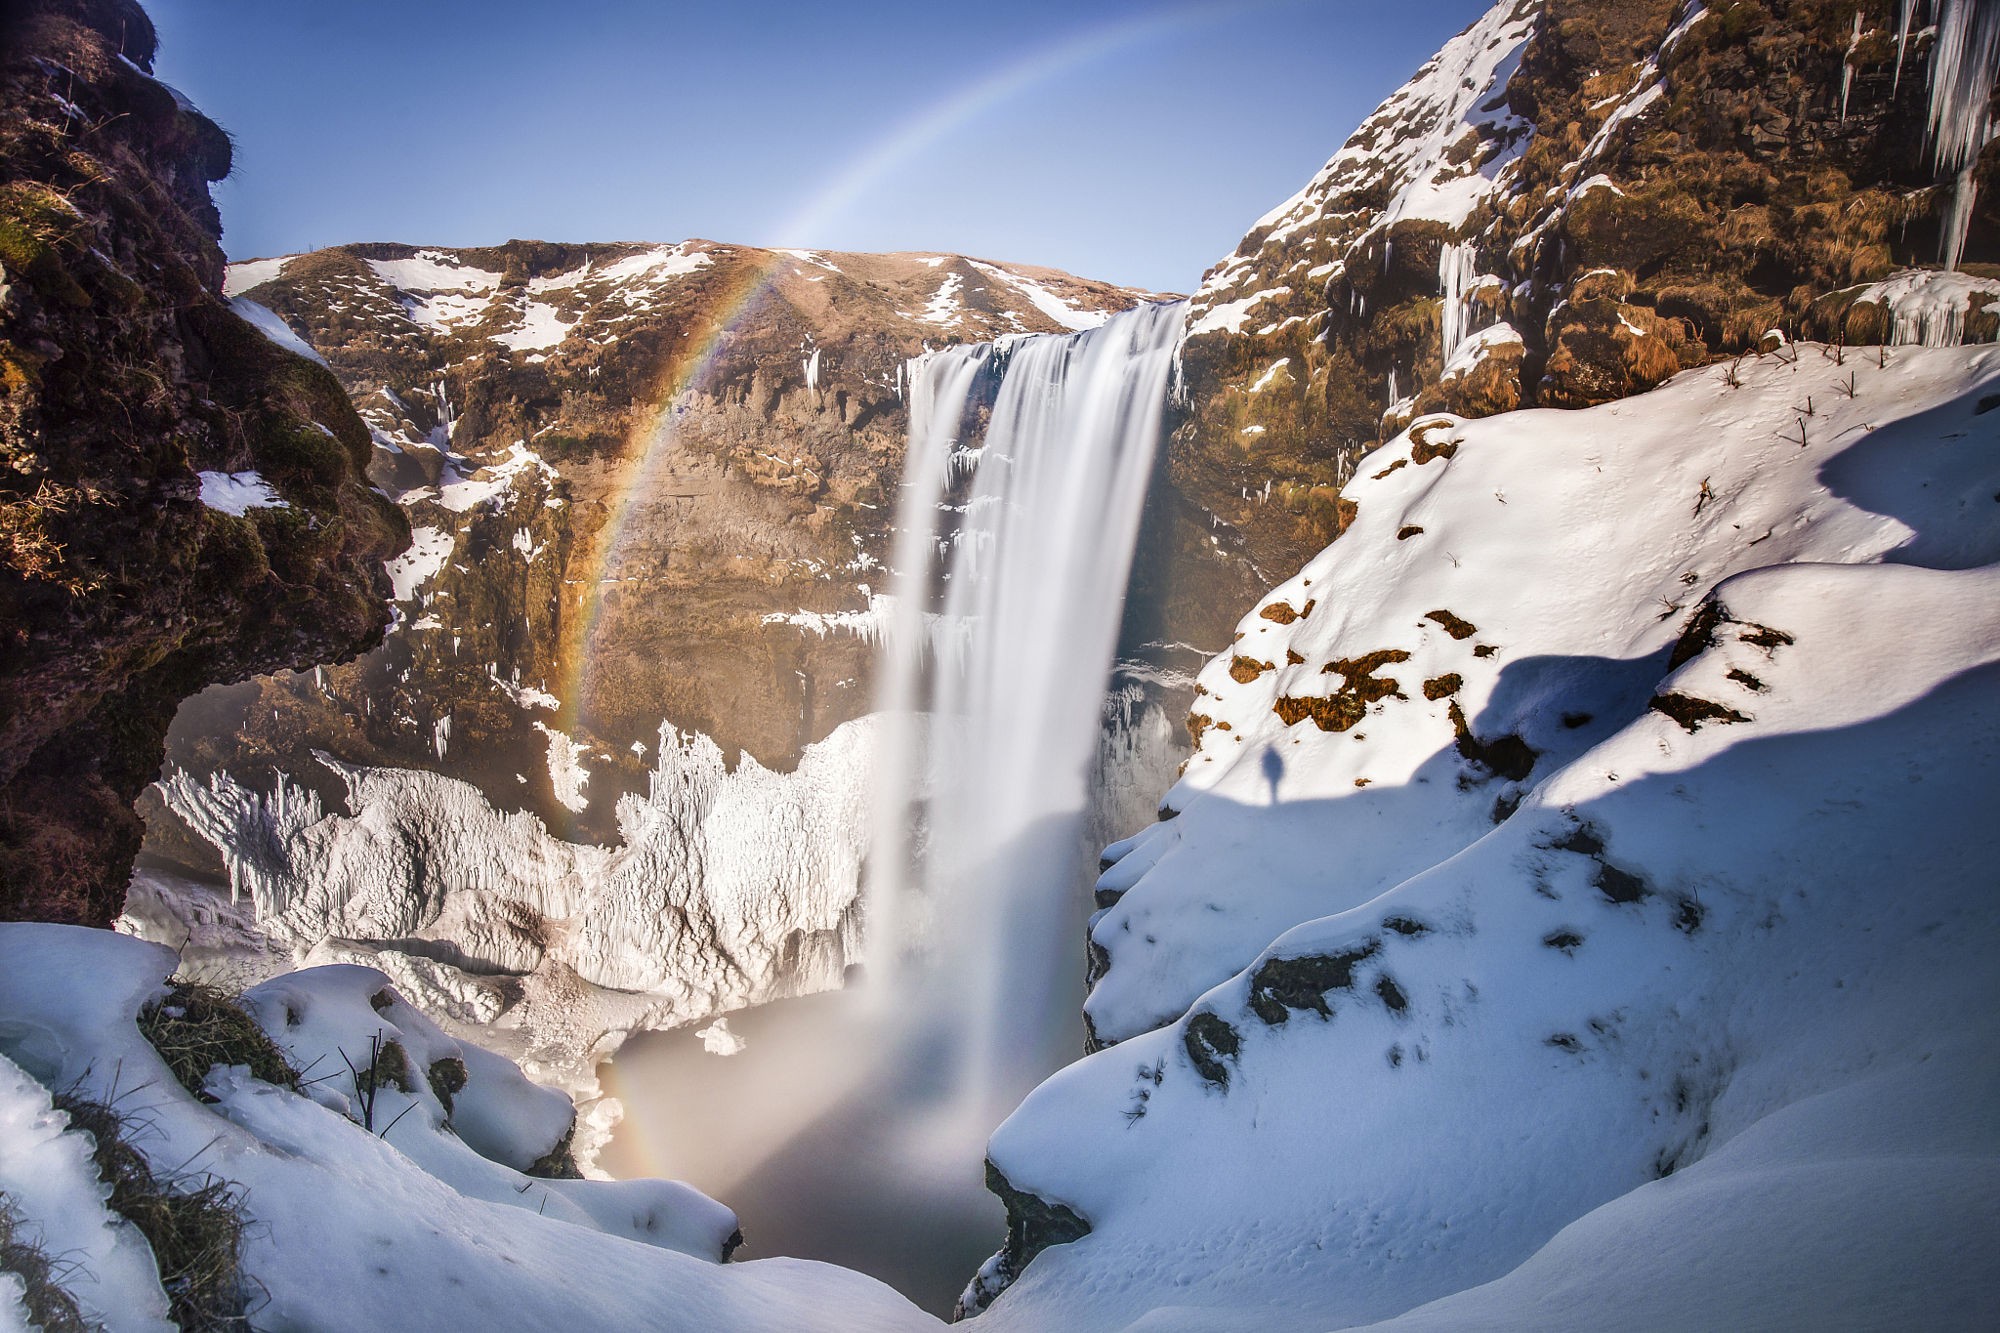 General 2000x1333 rainbows waterfall winter snow snowflakes nature mountains cold outdoors ice